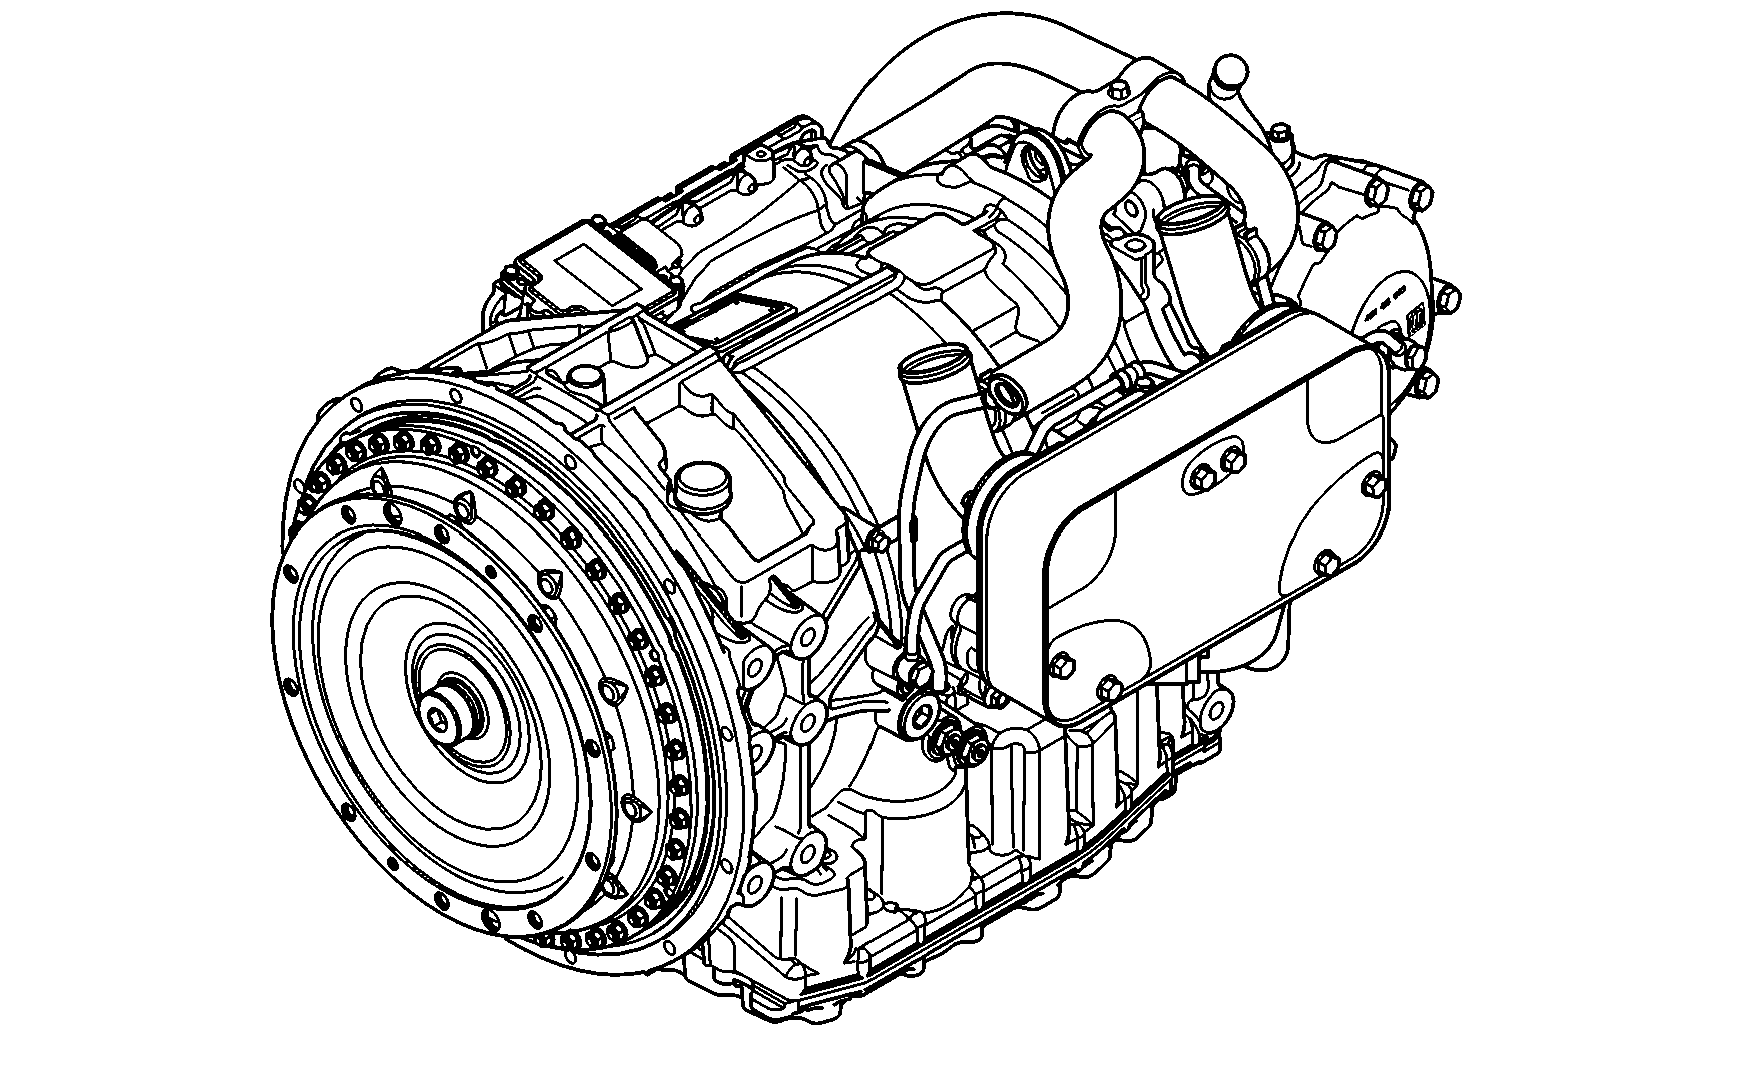 drawing for DENNIS SPECIAL VEHICLES 662869 - 6 AP 1403 B (figure 1)